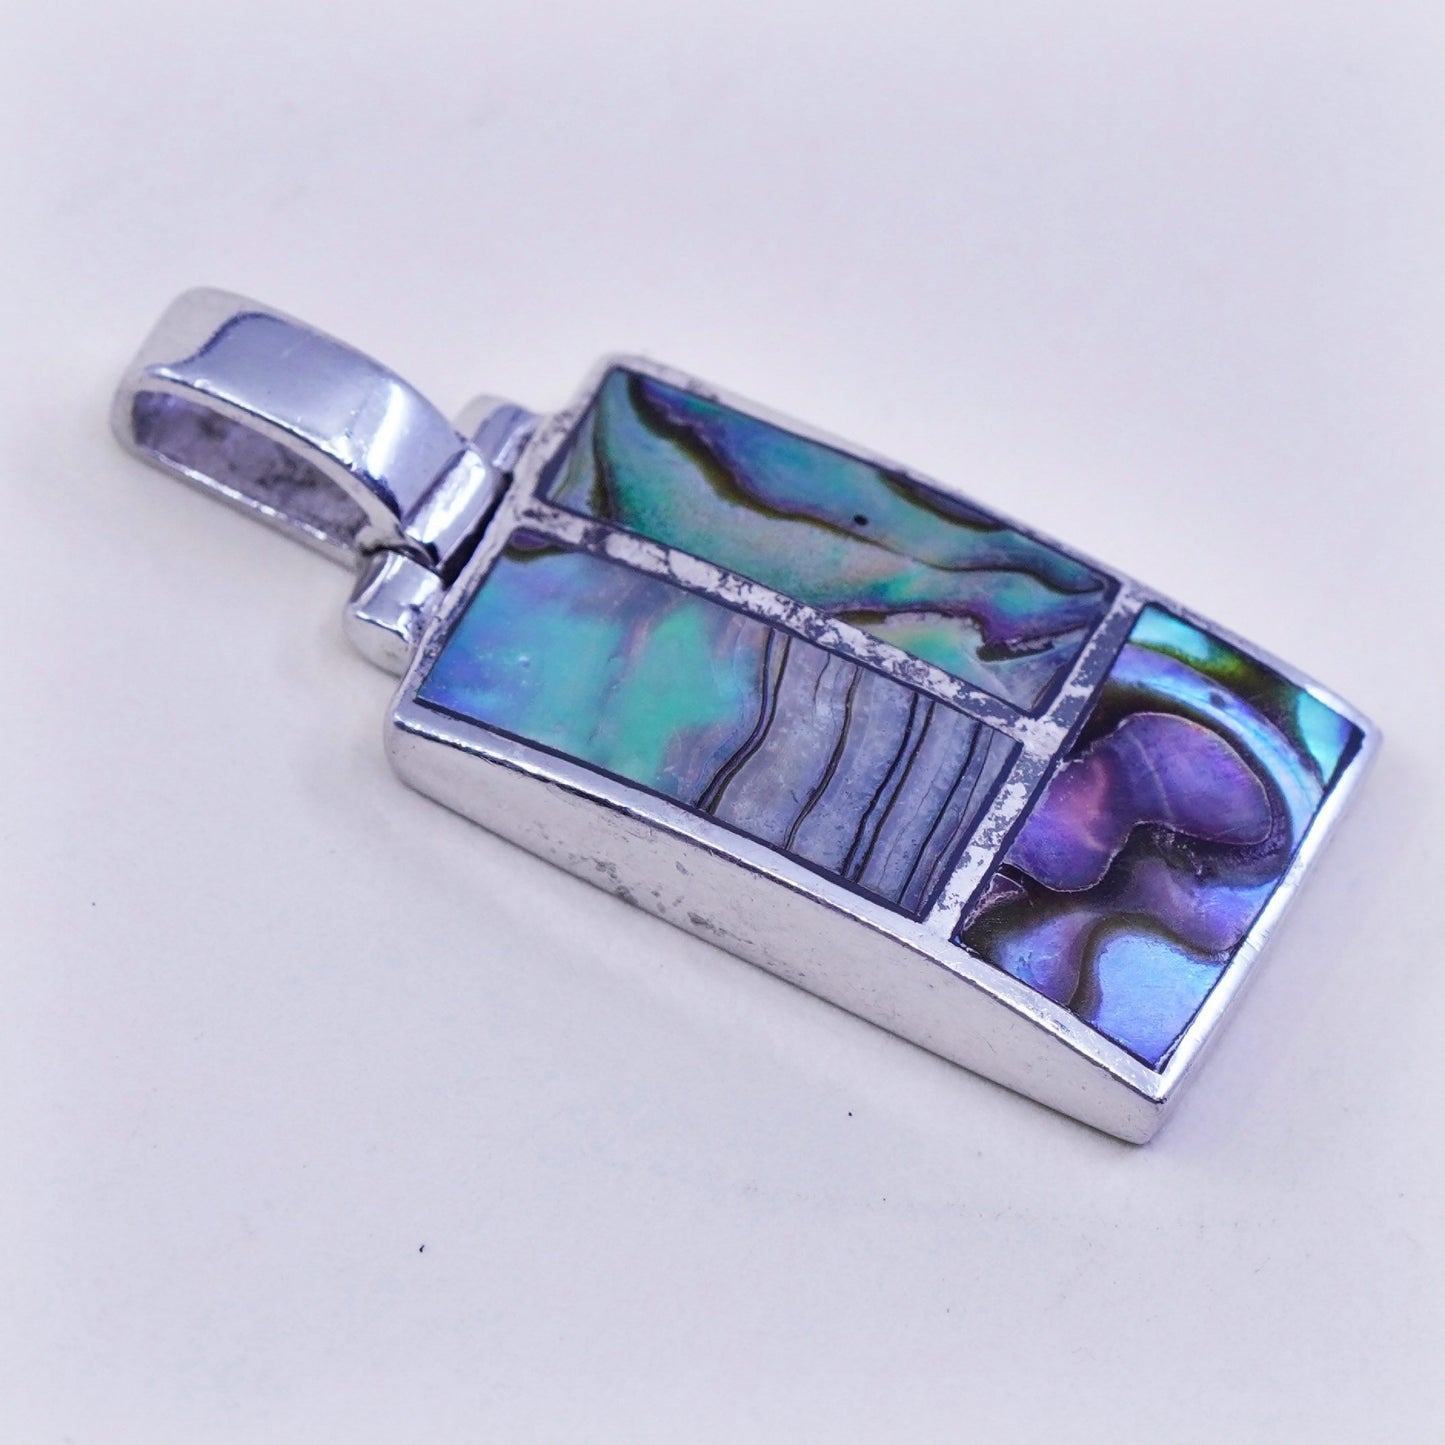 Vintage sterling 925 silver handmade pendant, with long abalone